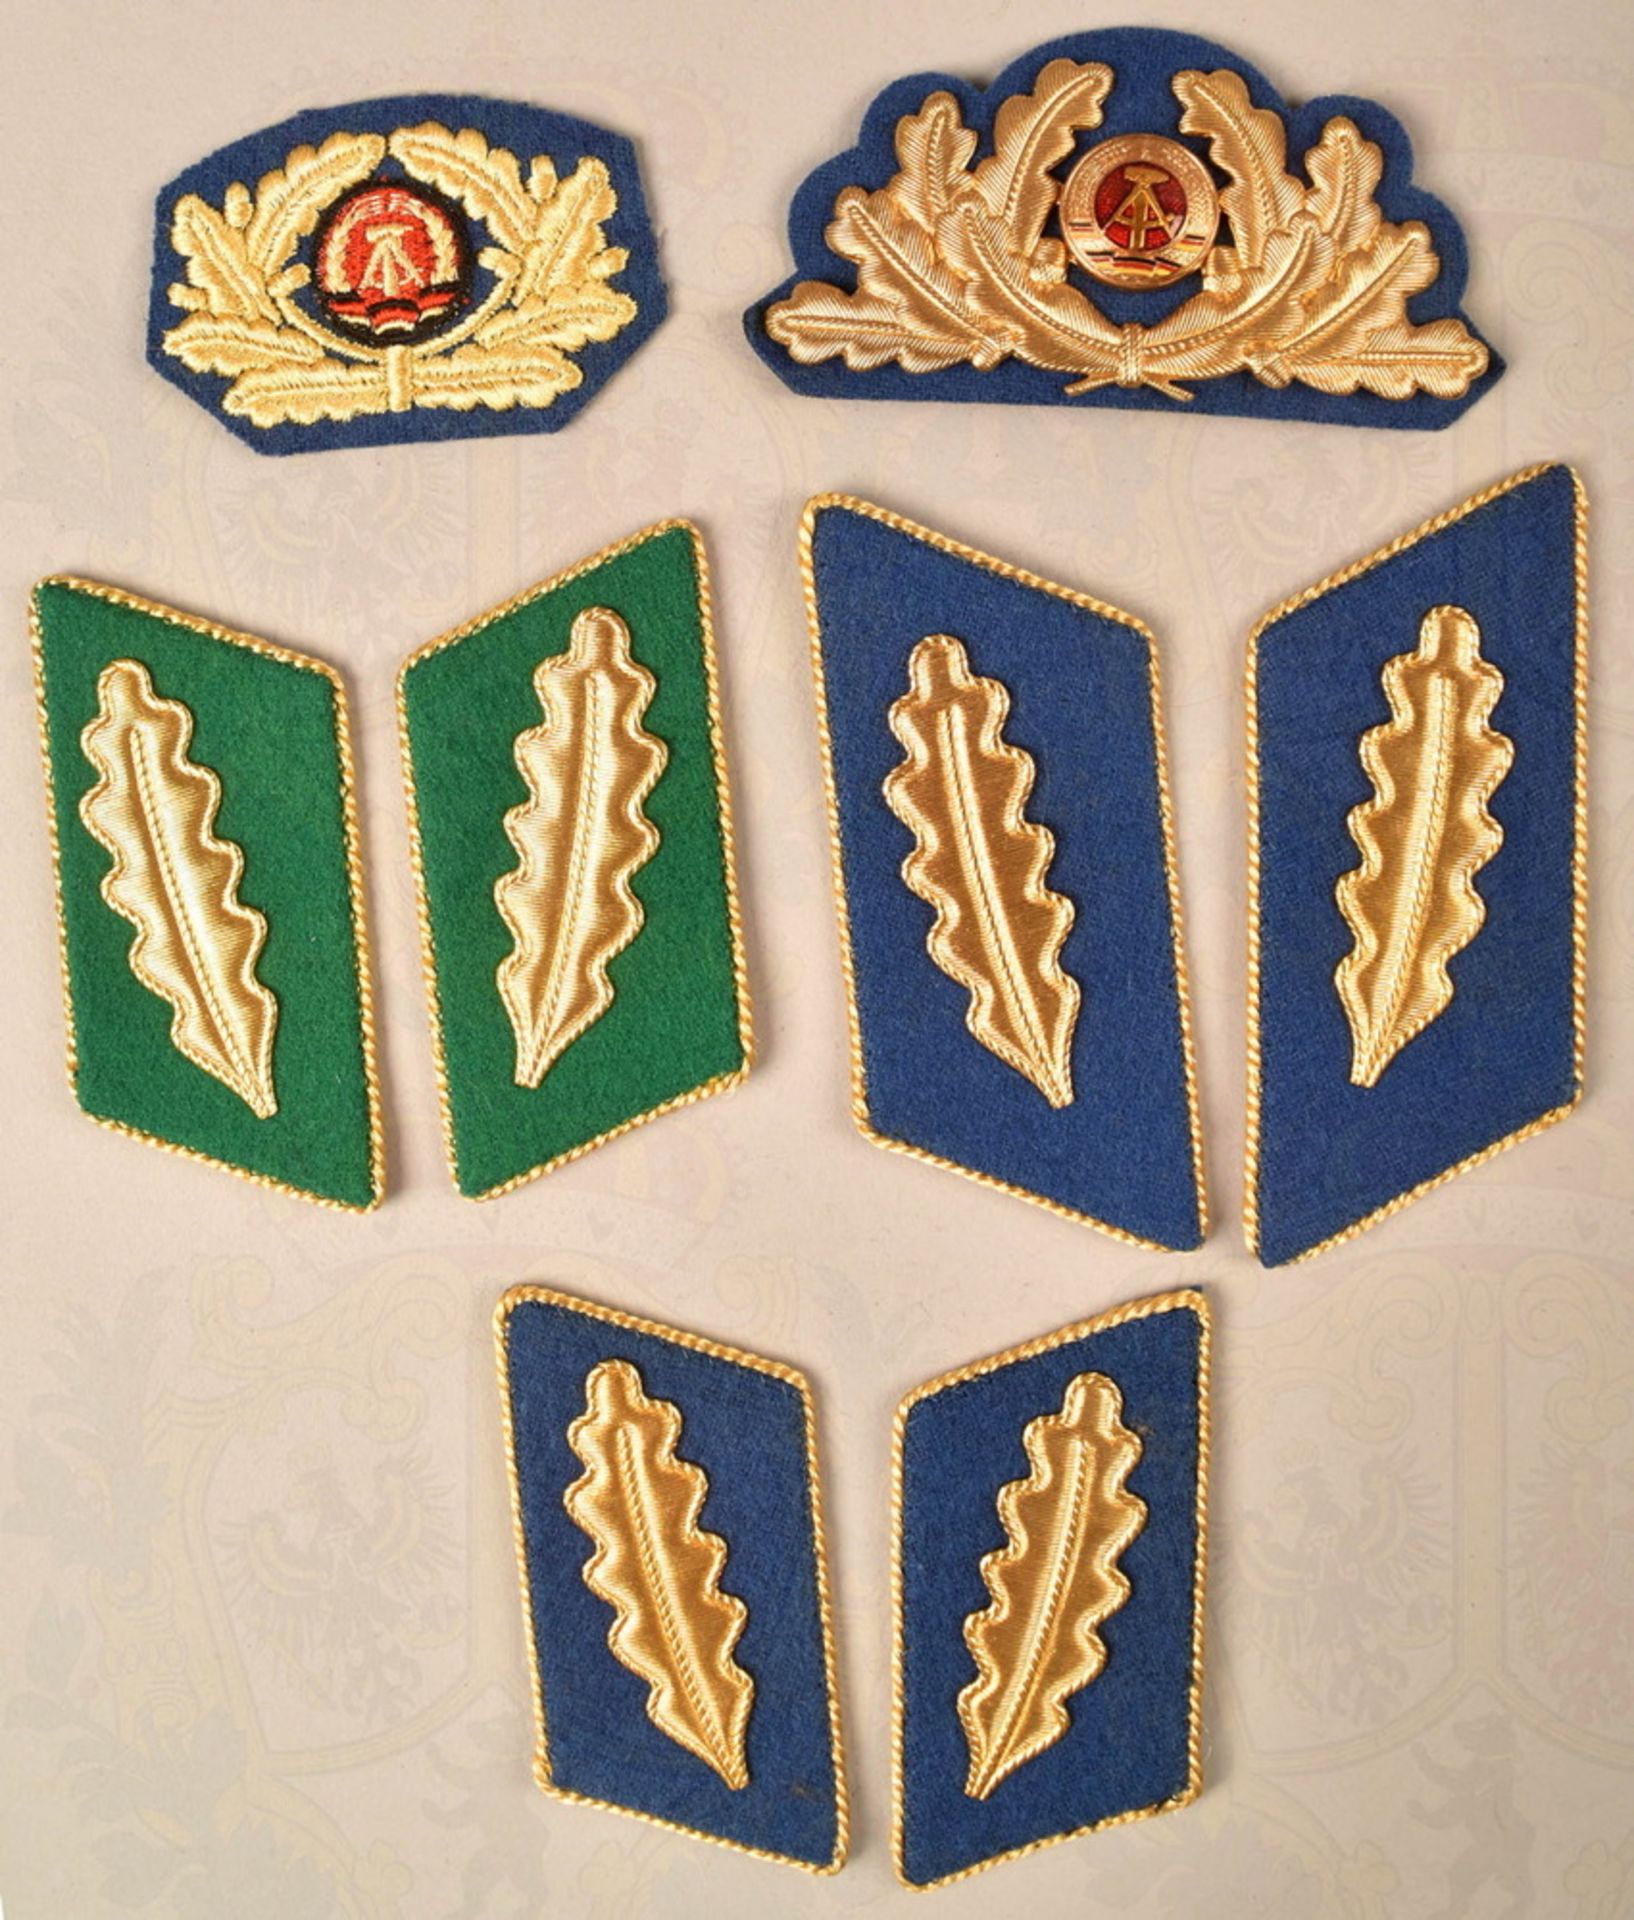 Grouping of uniform insignias National Peoples Police